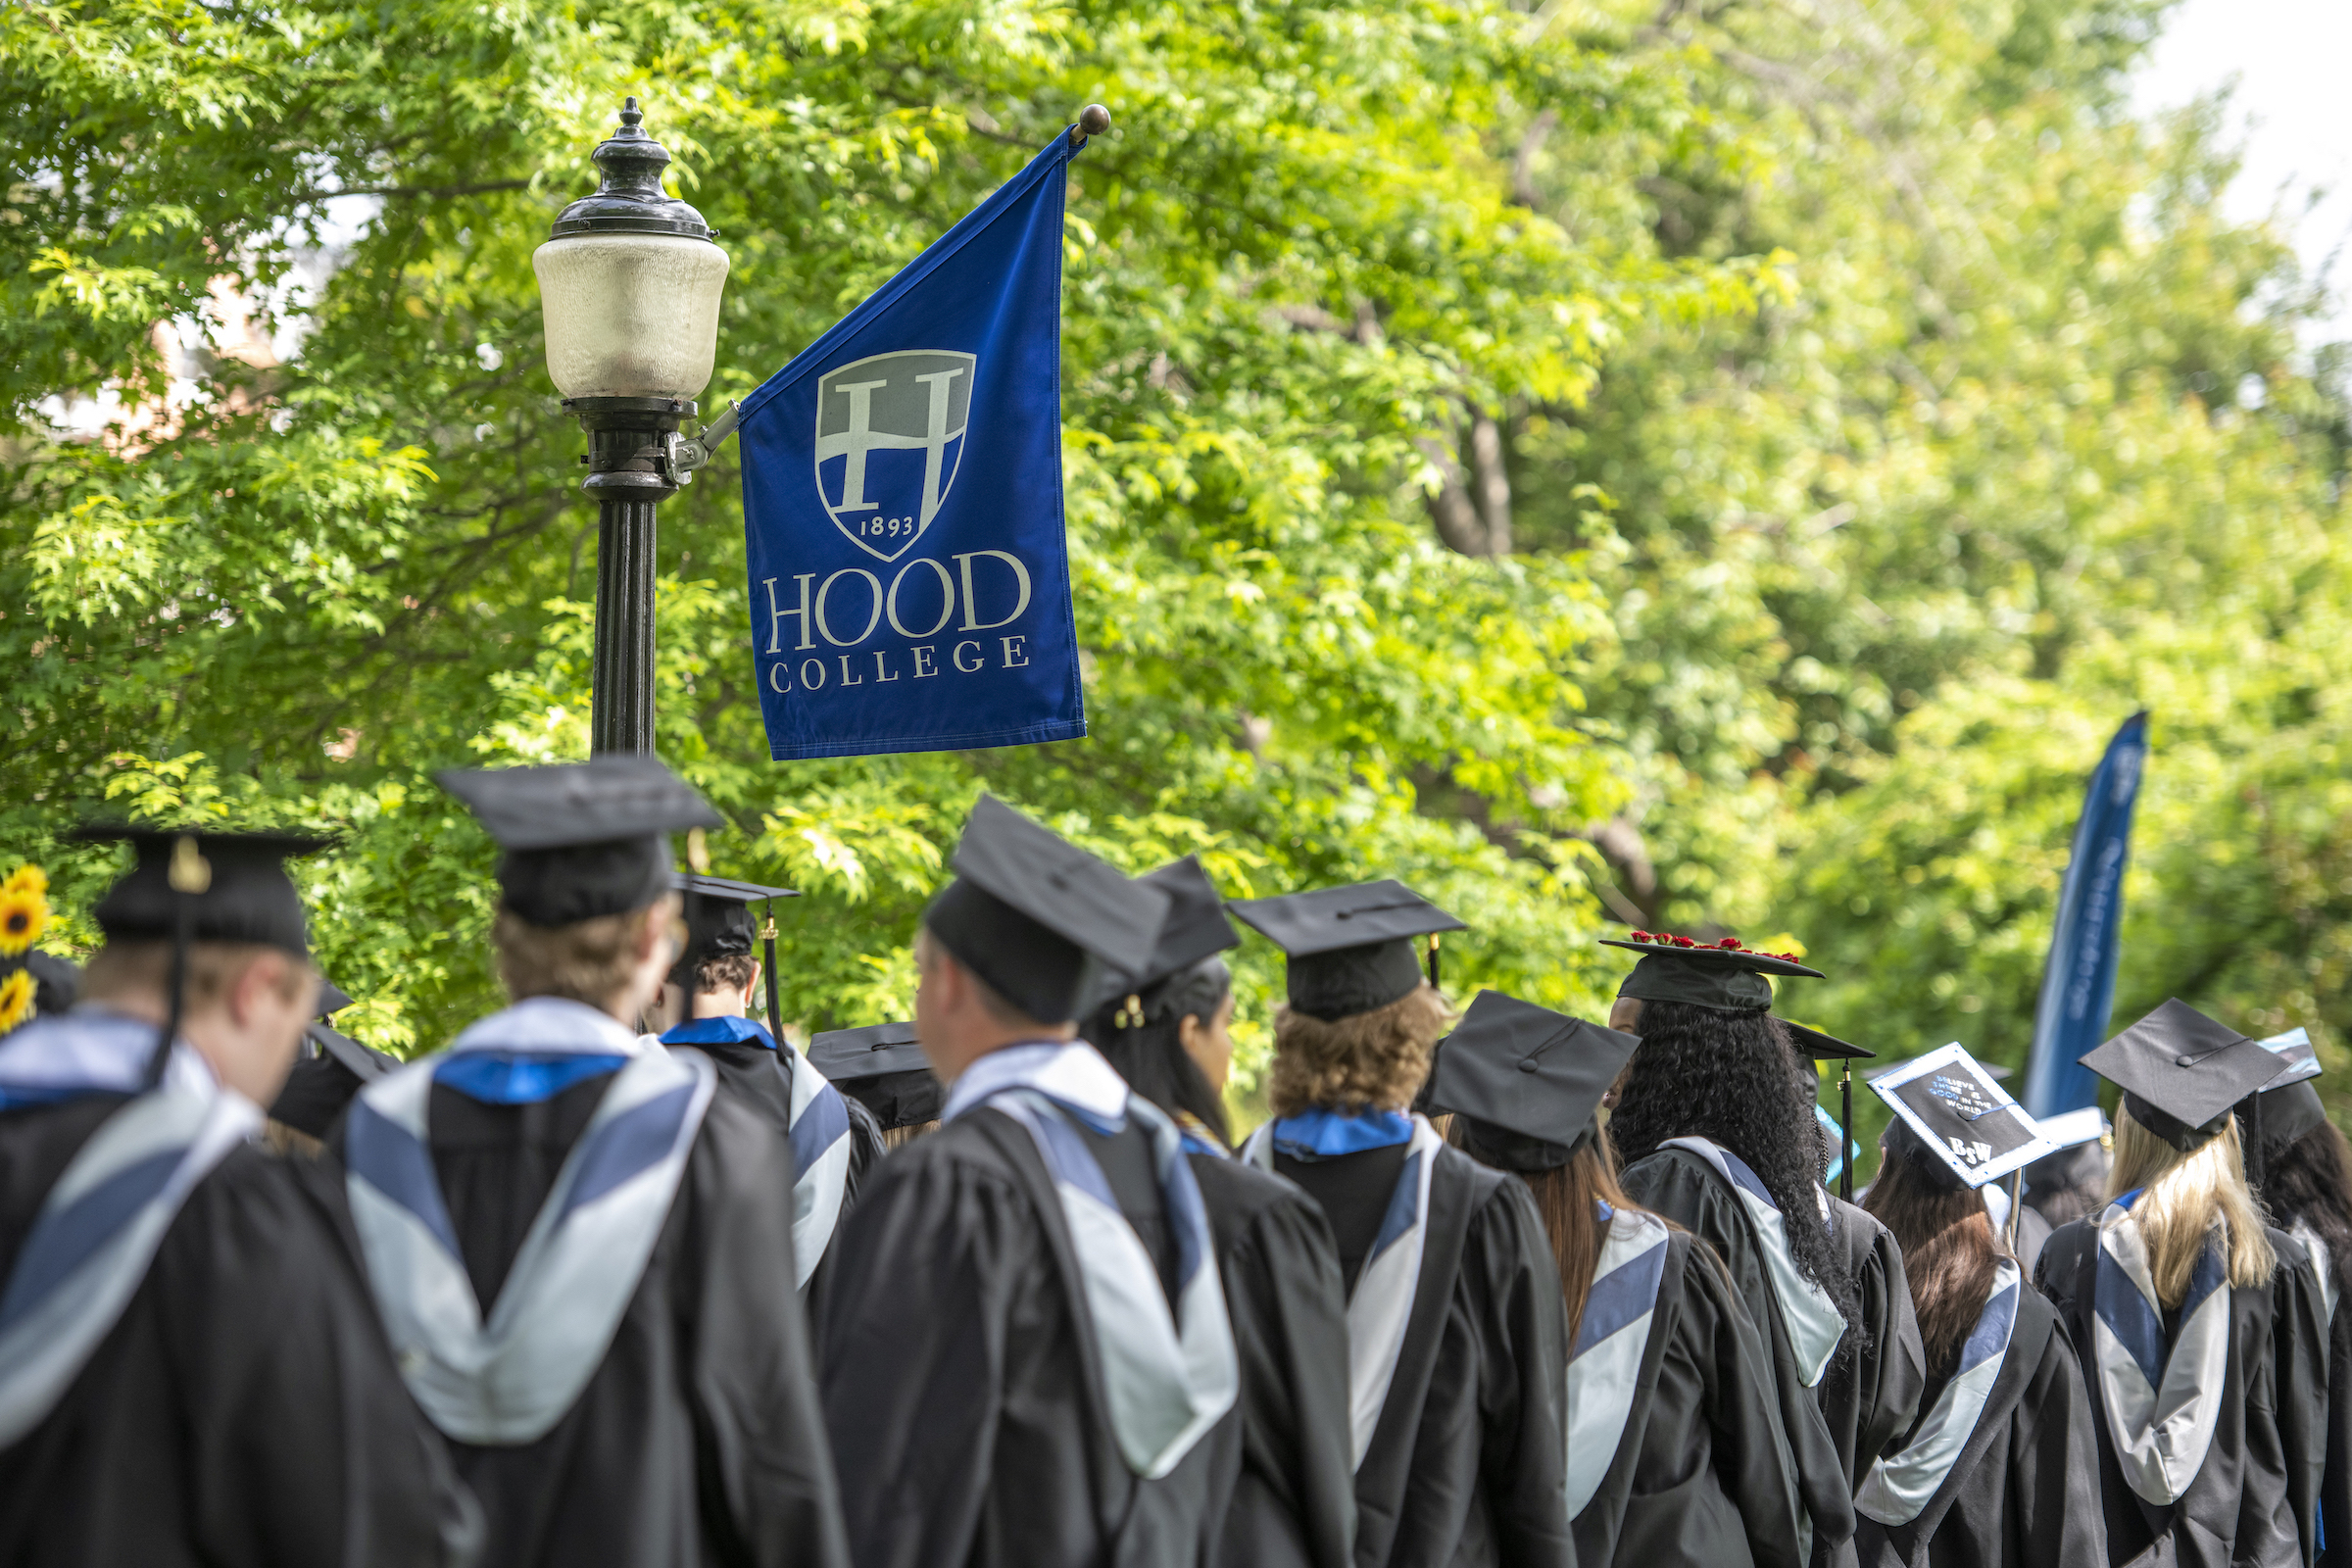 A crowd of Hood College graduates gather on the quad.